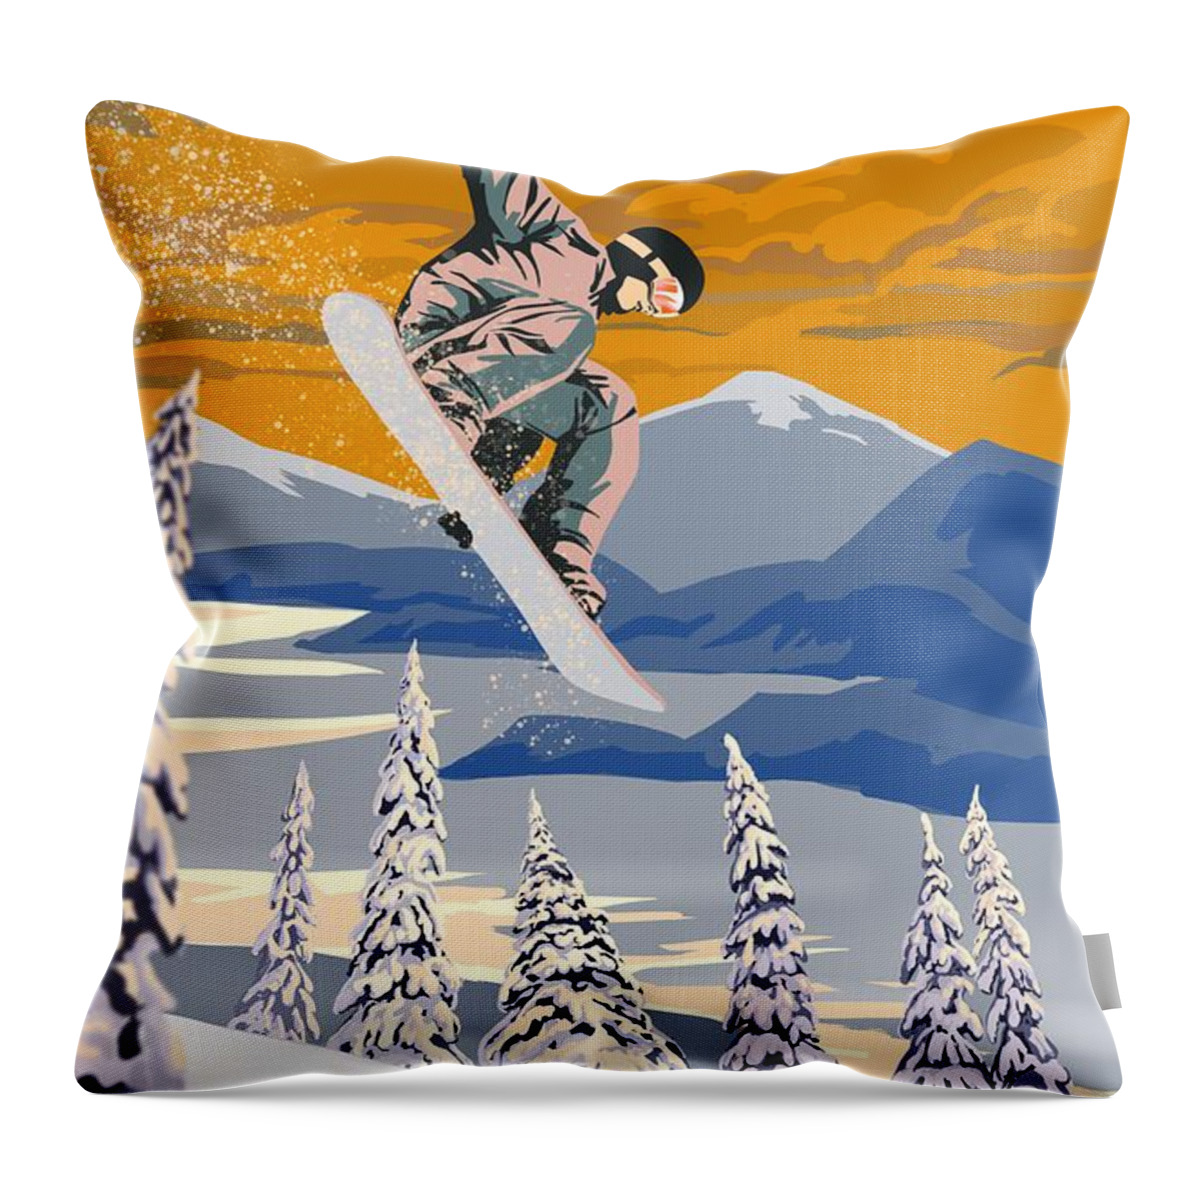 Snowboard Throw Pillow featuring the painting Snowboarder Air by Sassan Filsoof